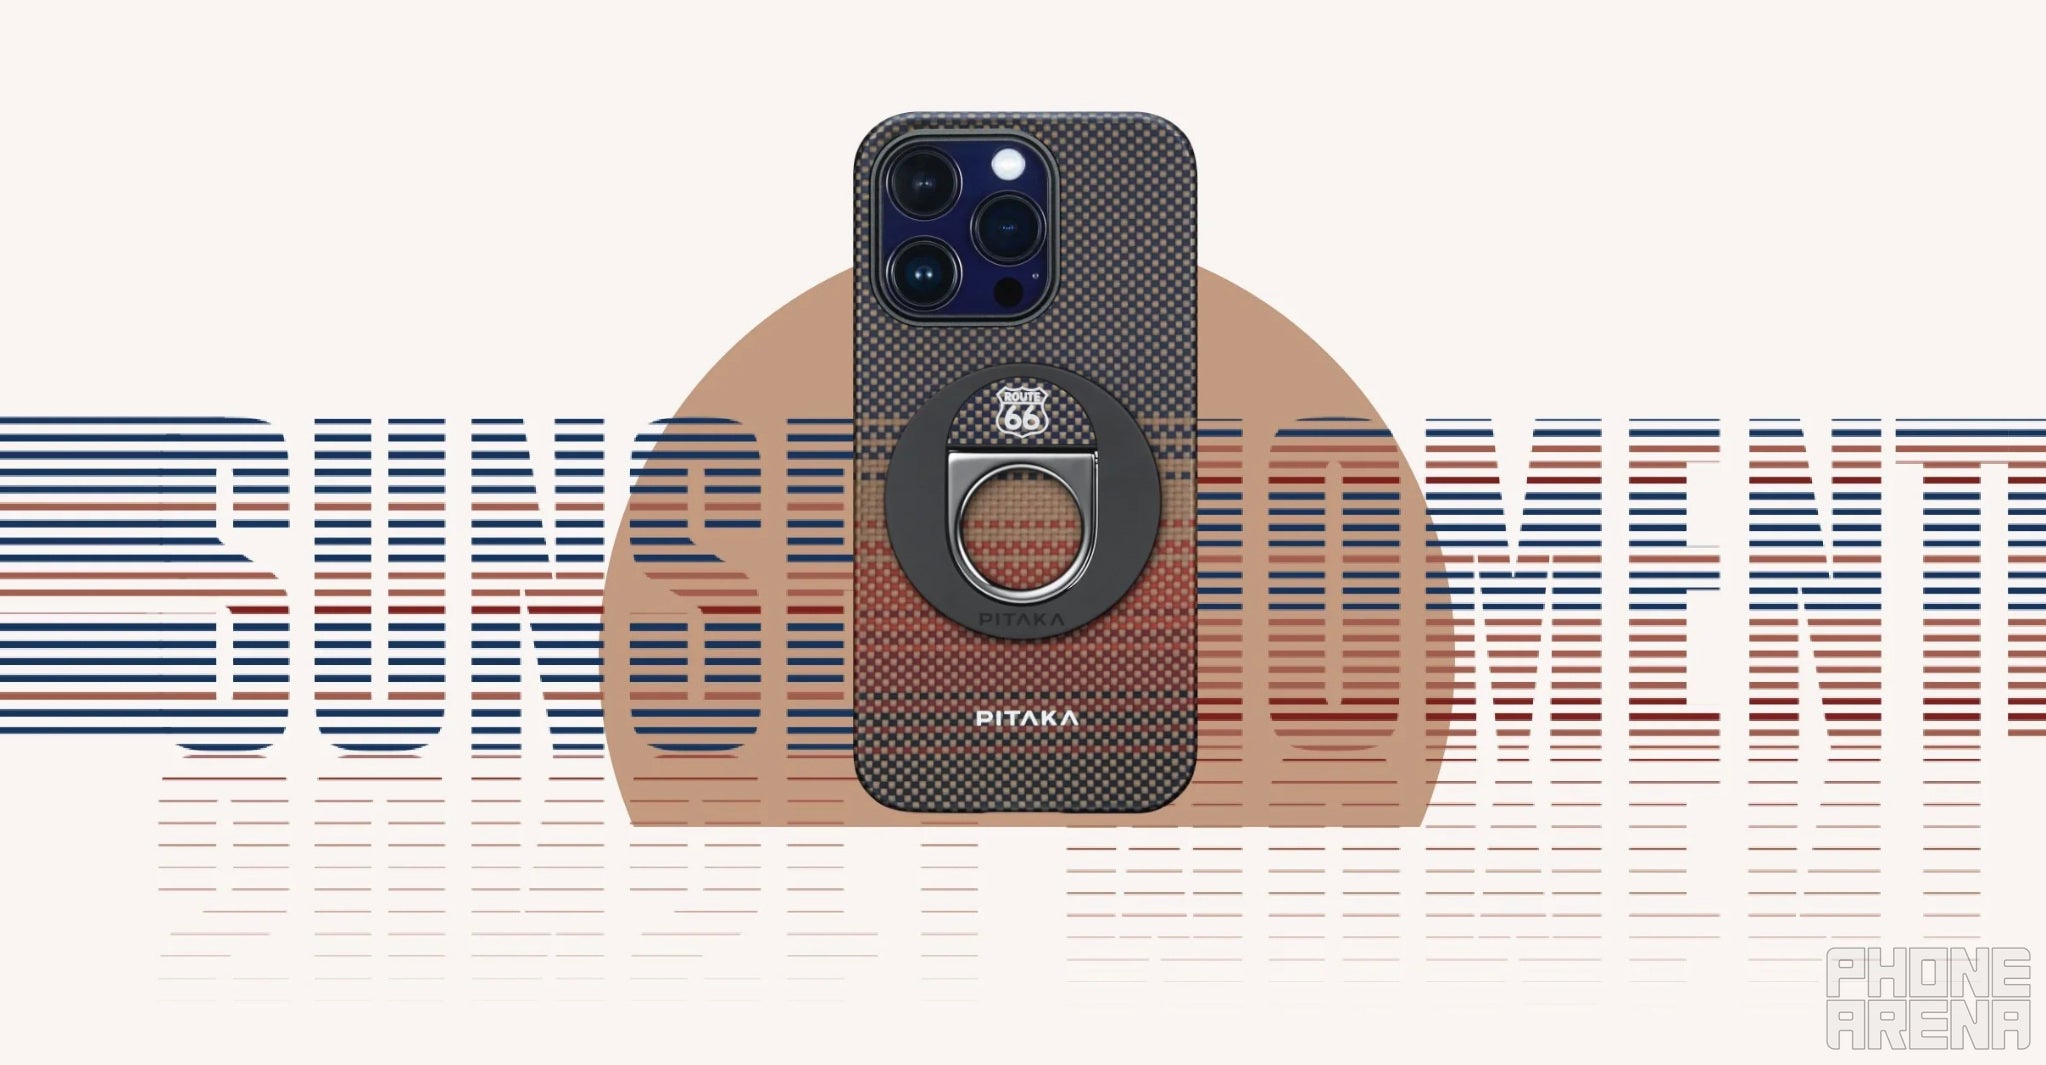 Sold out Sunset Moment case model - Pitaka&#039;s new colors: aramid/carbon fiber cases and watch bands with a dash of character!